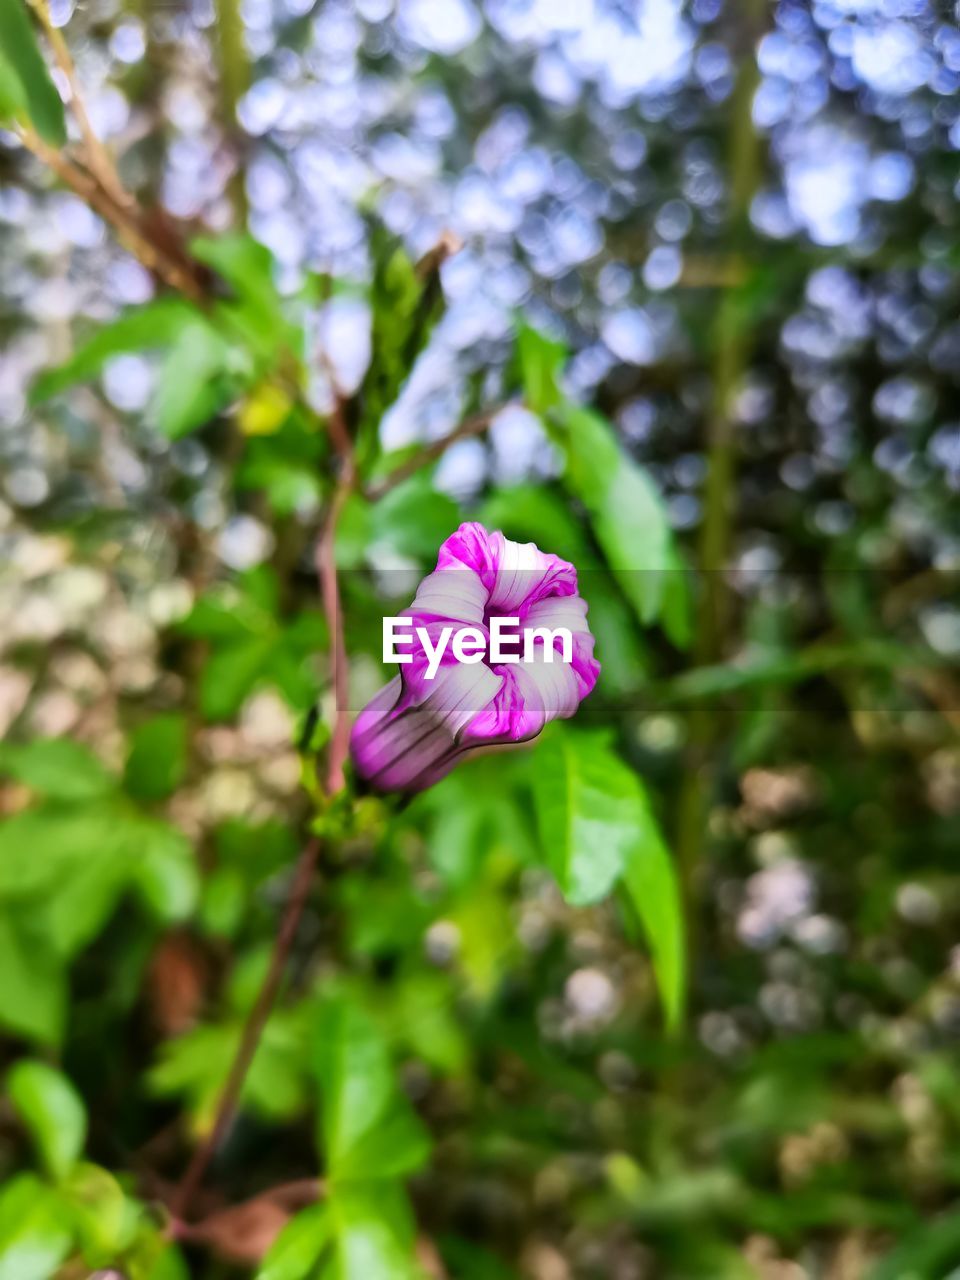 plant, flowering plant, flower, freshness, beauty in nature, fragility, nature, growth, petal, close-up, flower head, inflorescence, pink, green, blossom, purple, wildflower, no people, focus on foreground, day, macro photography, springtime, outdoors, leaf, botany, tree, plant part, selective focus